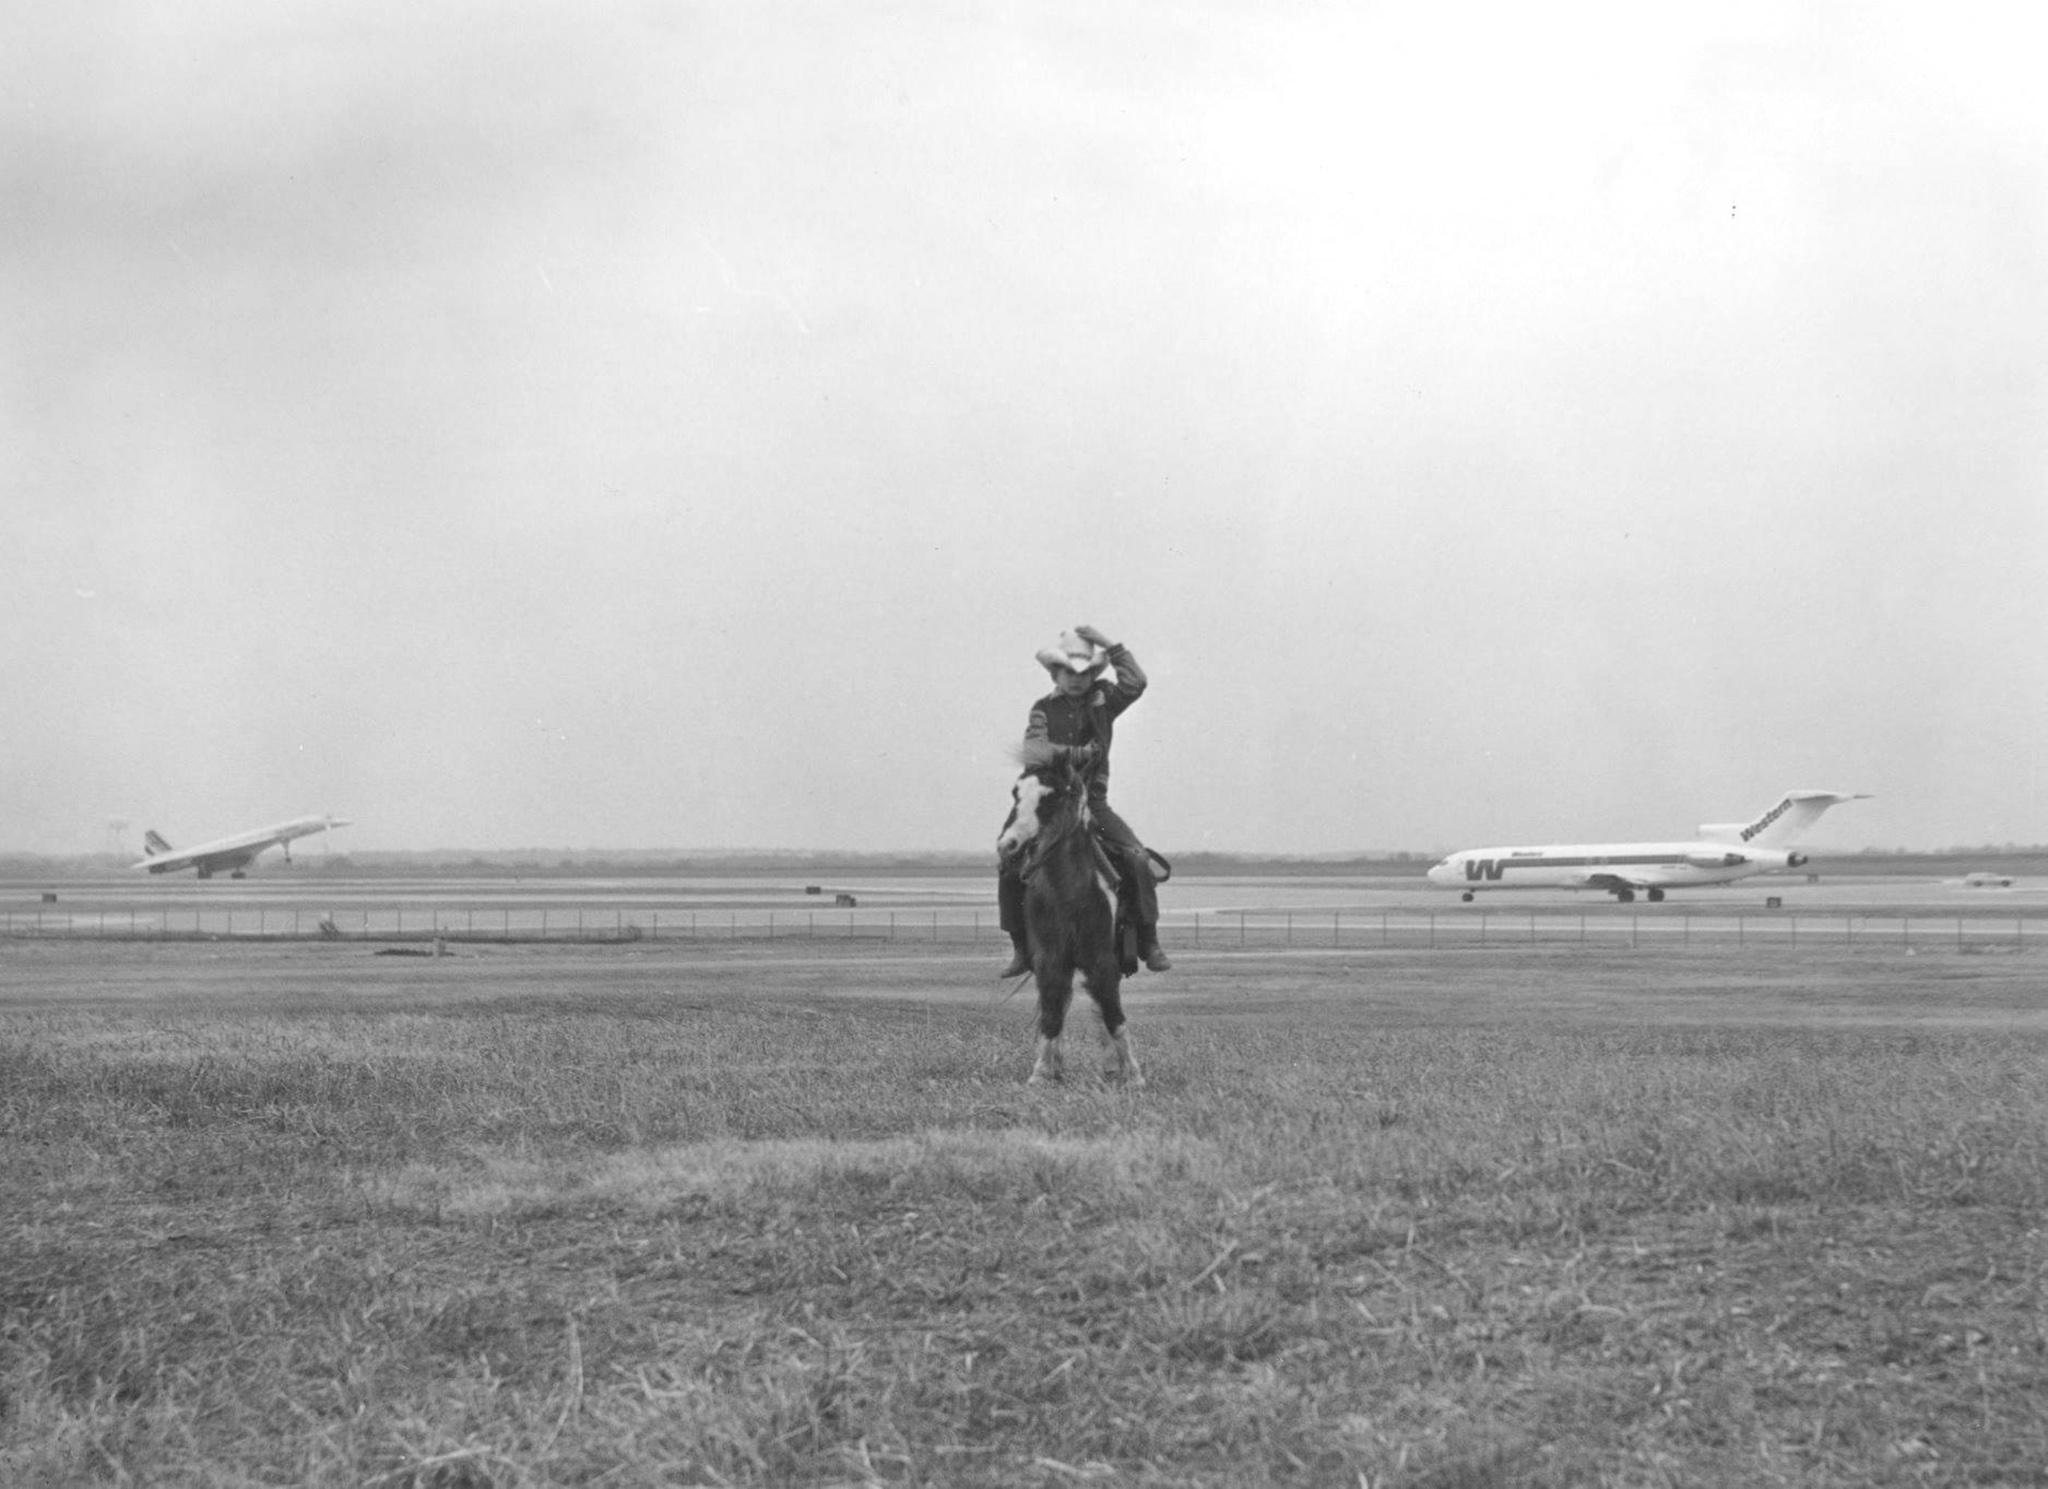 a young boy riding a pony stands in the middle of a field with planes taking off in the background